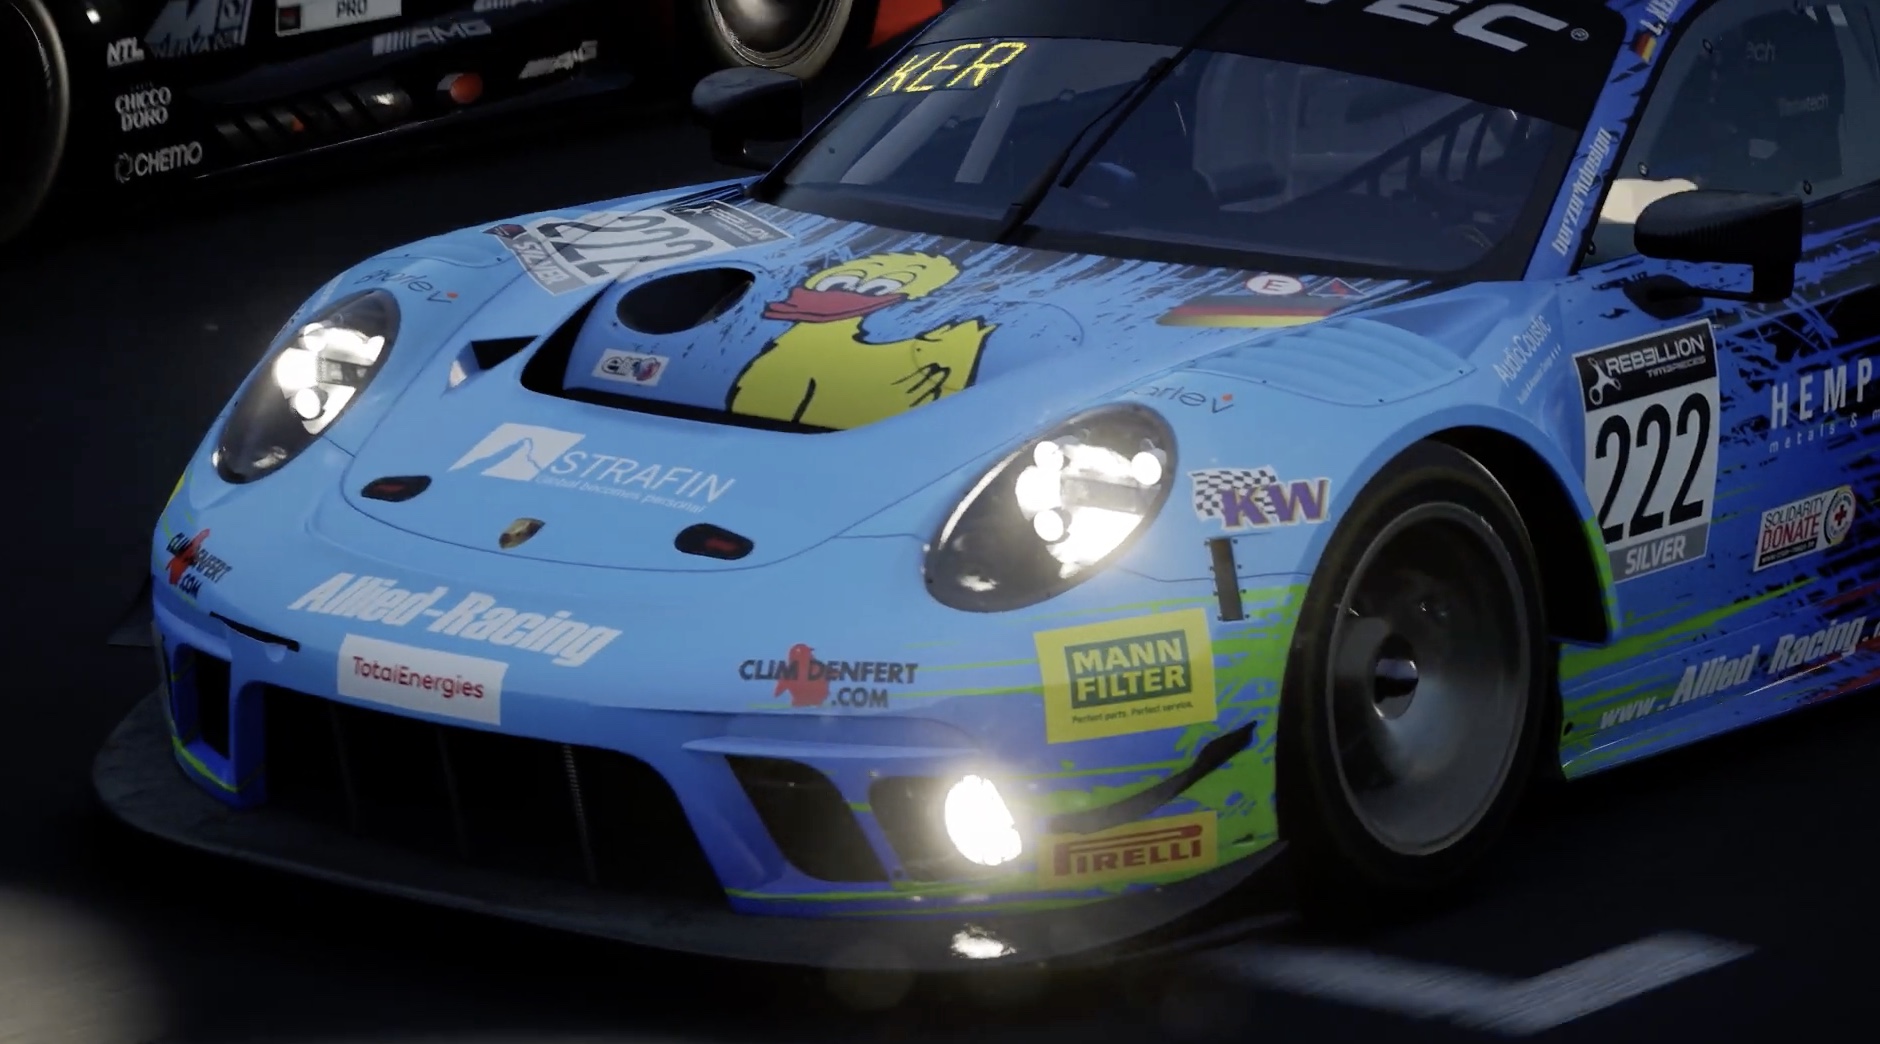 Assetto Corsa Competizione - PlayStation 5, PlayStation 5